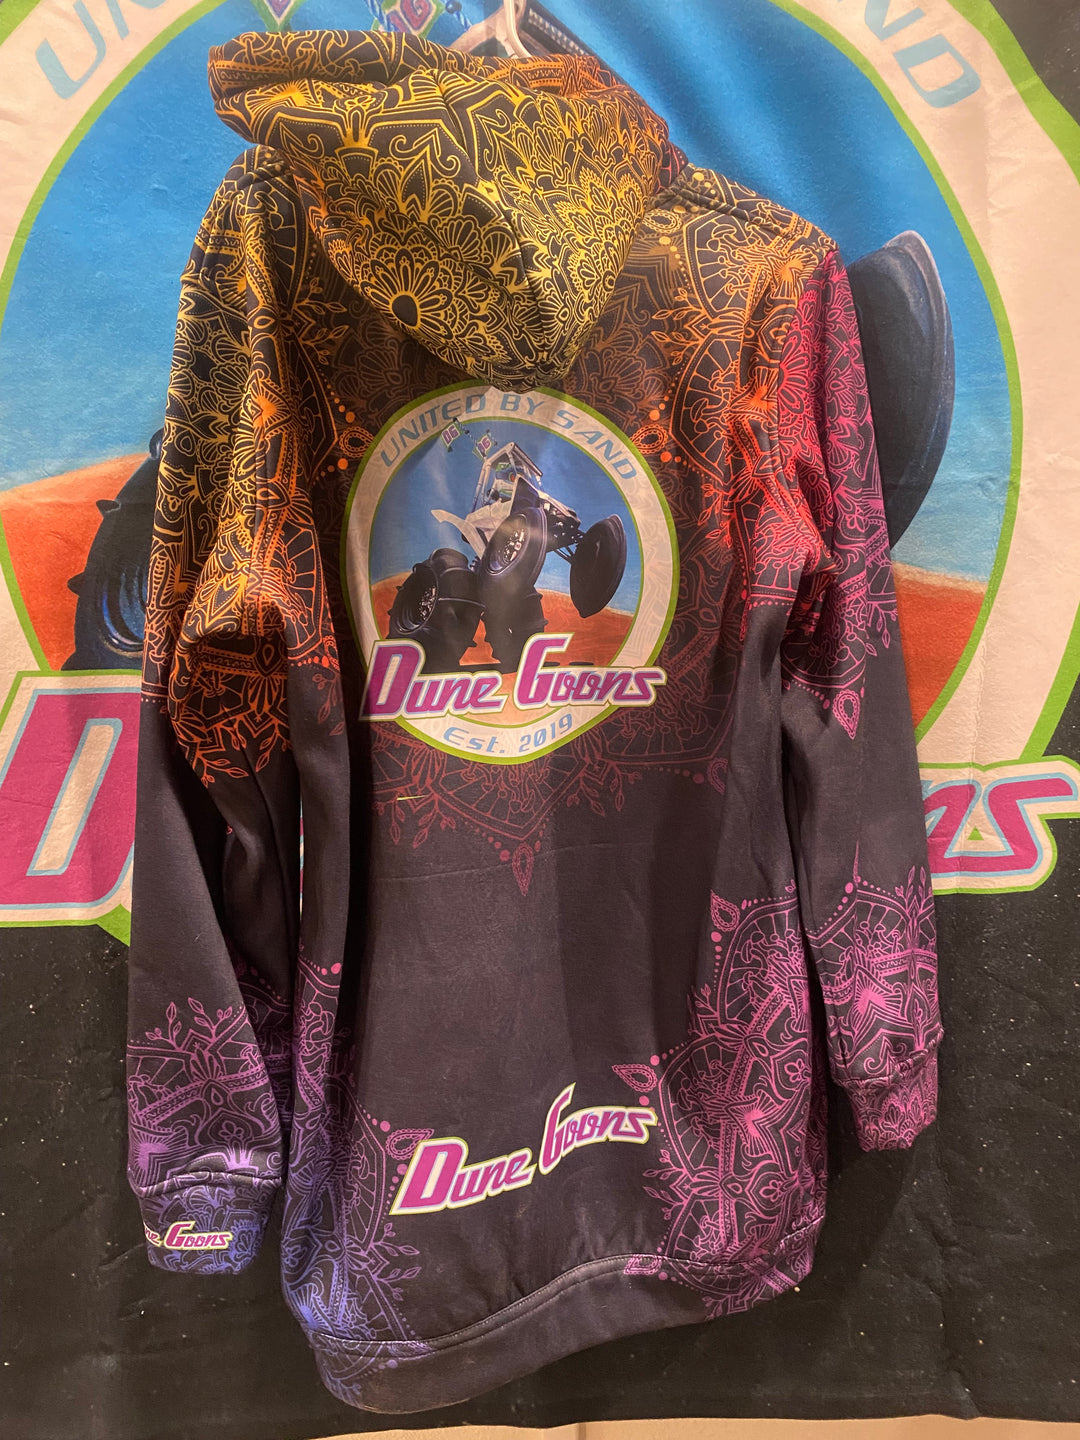 Dune Goons One of a Kind Hoodie-Dress - Thick/Warm Comfy Style